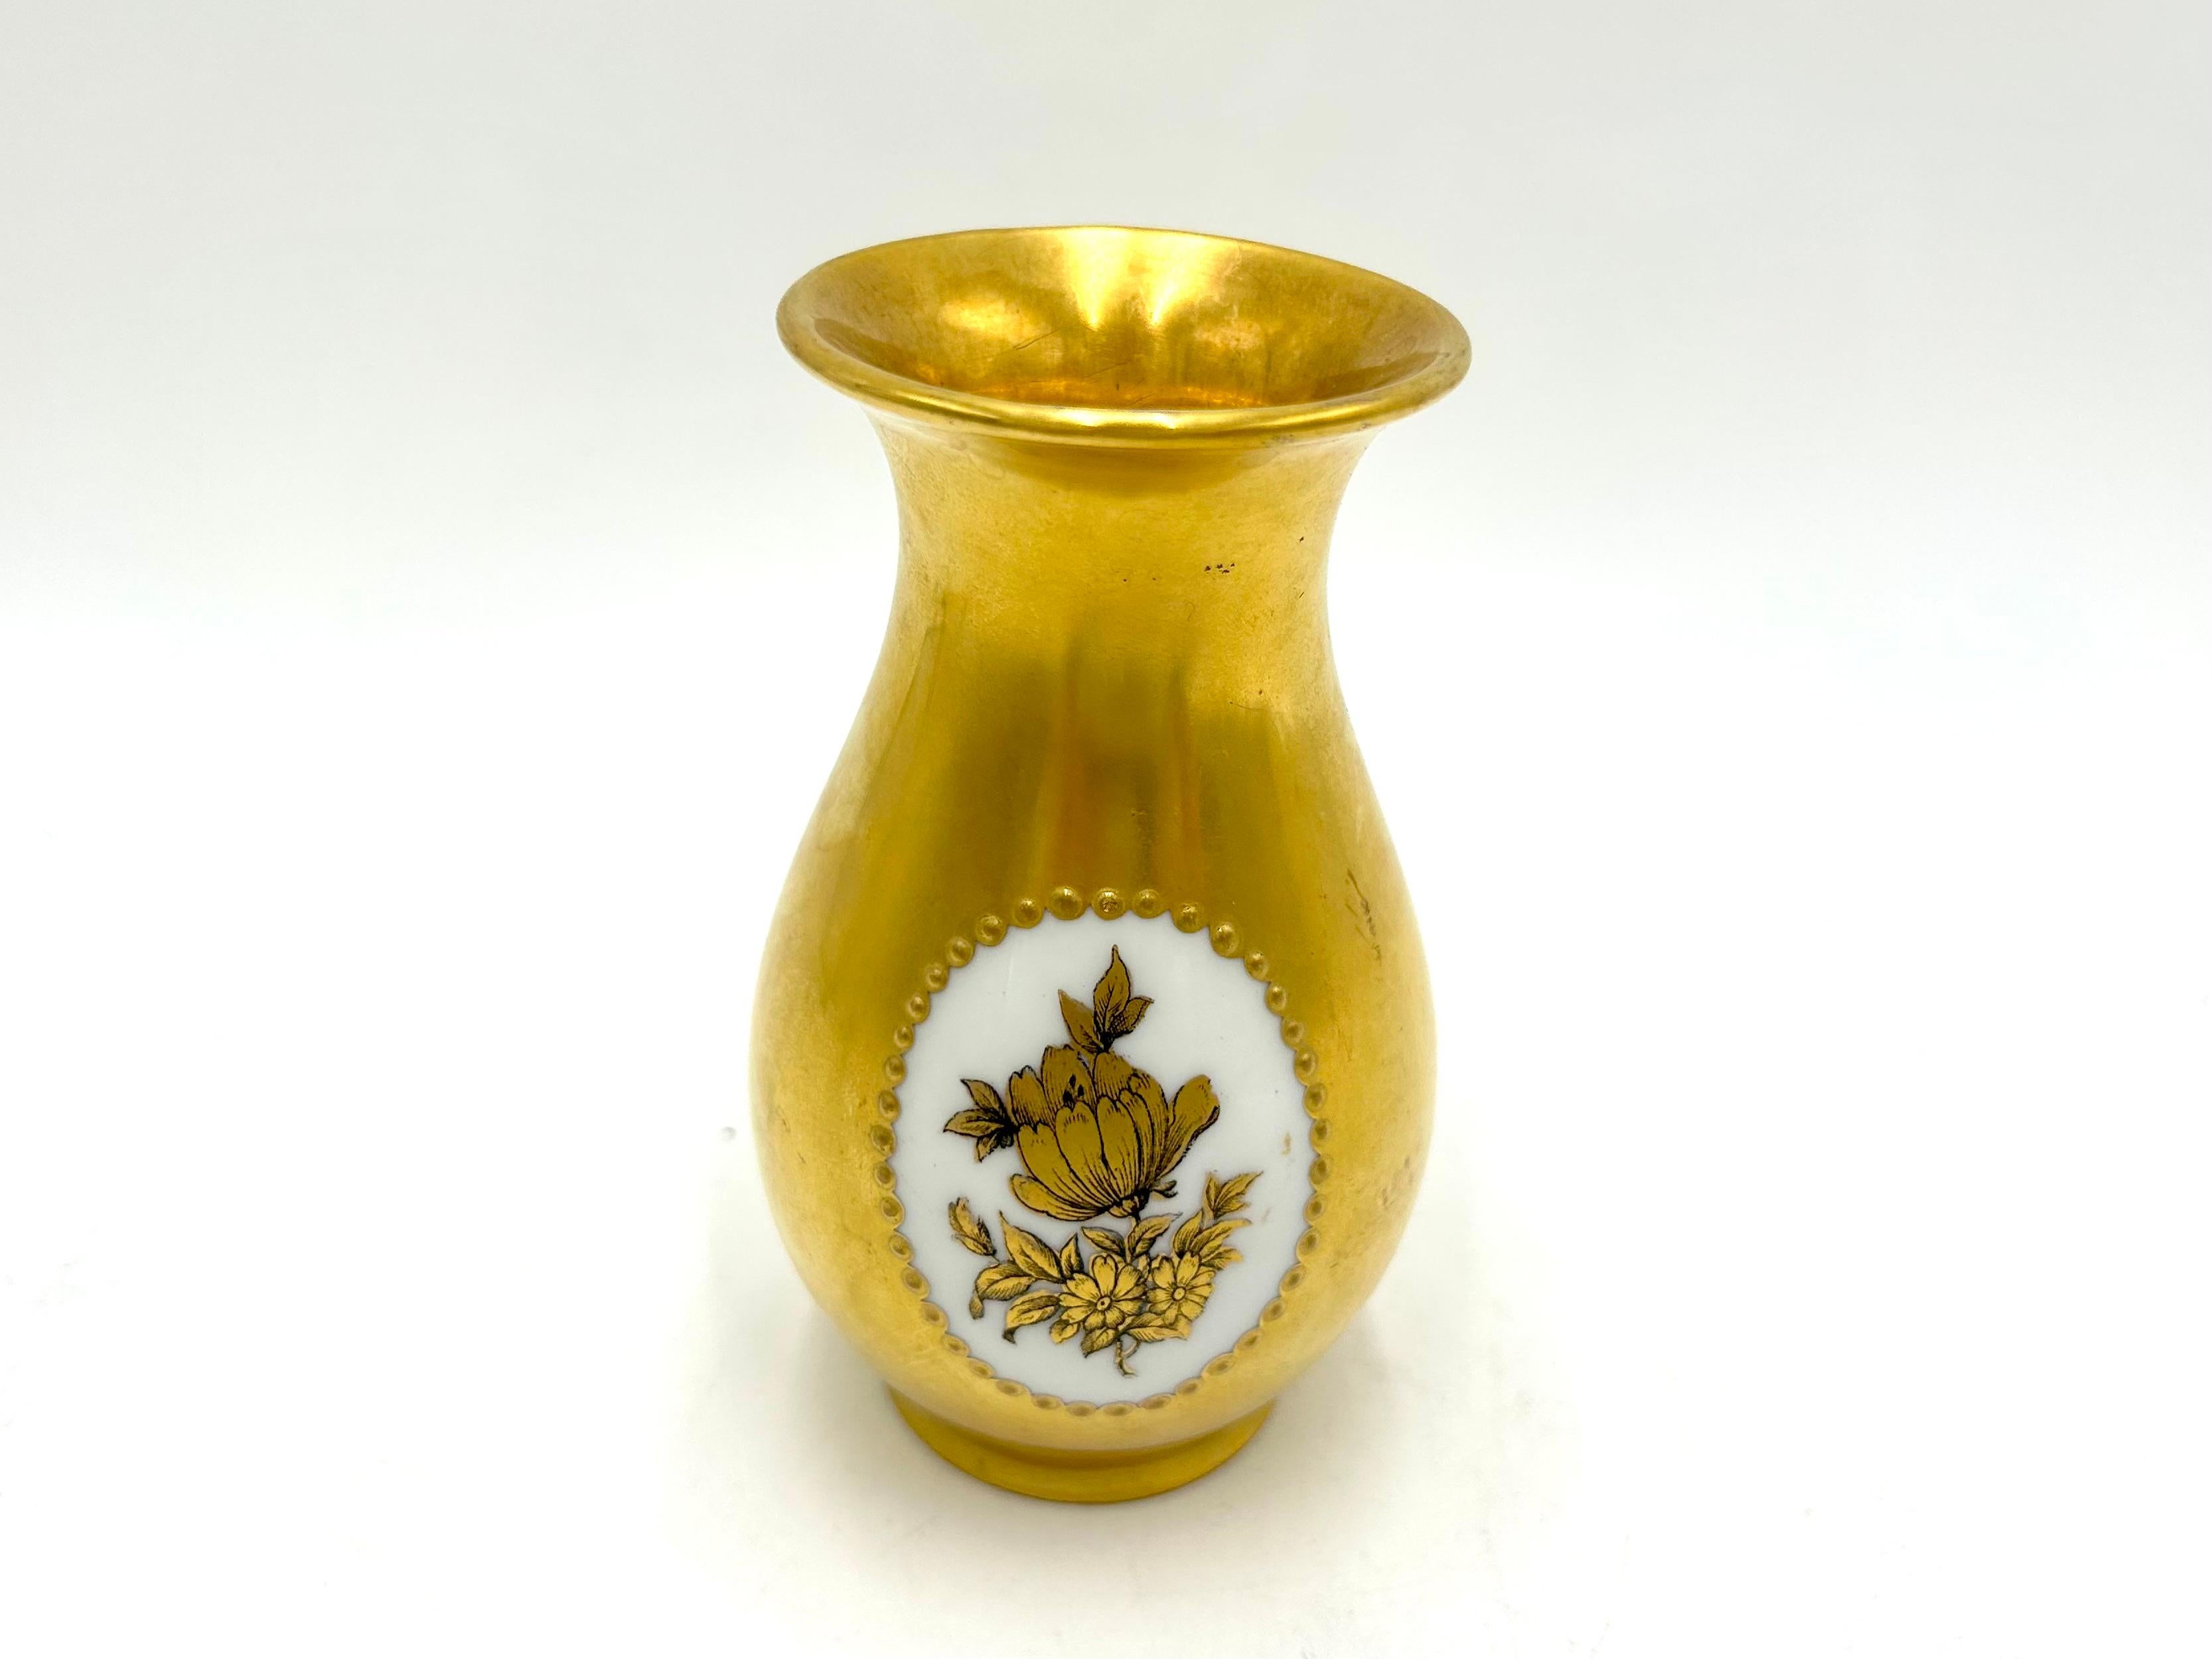 A unique vase from the renowned German manufacturer Rosenthal.
The product is entirely covered with gilding, on one side decorated with a golden flower on a white background.
The vase was produced around 1930.
Very good condition, no